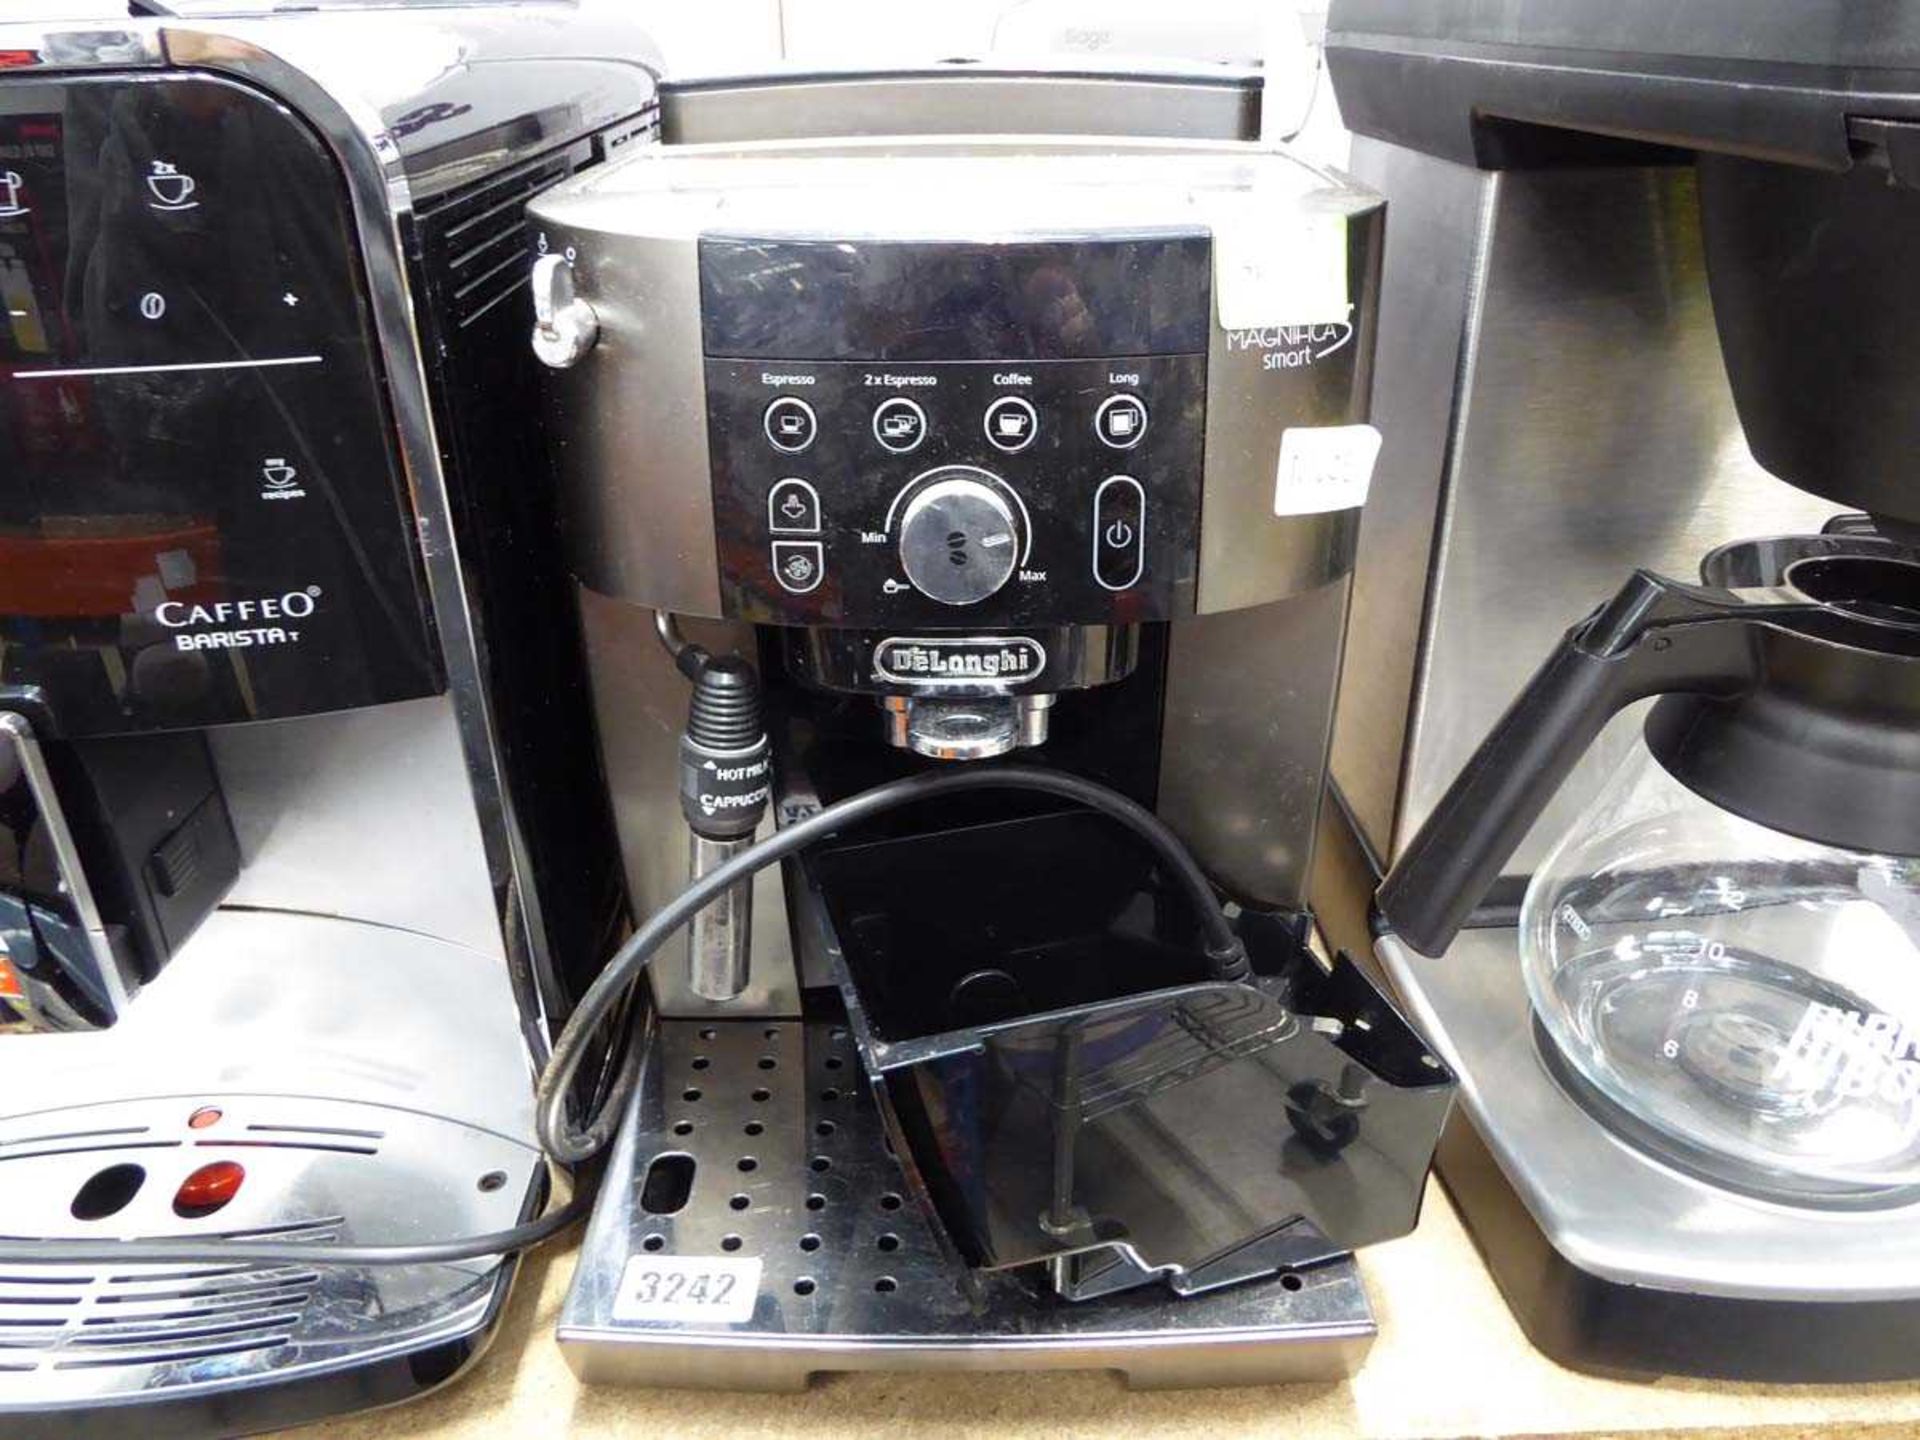 Unboxed DeLonghi coffee machine